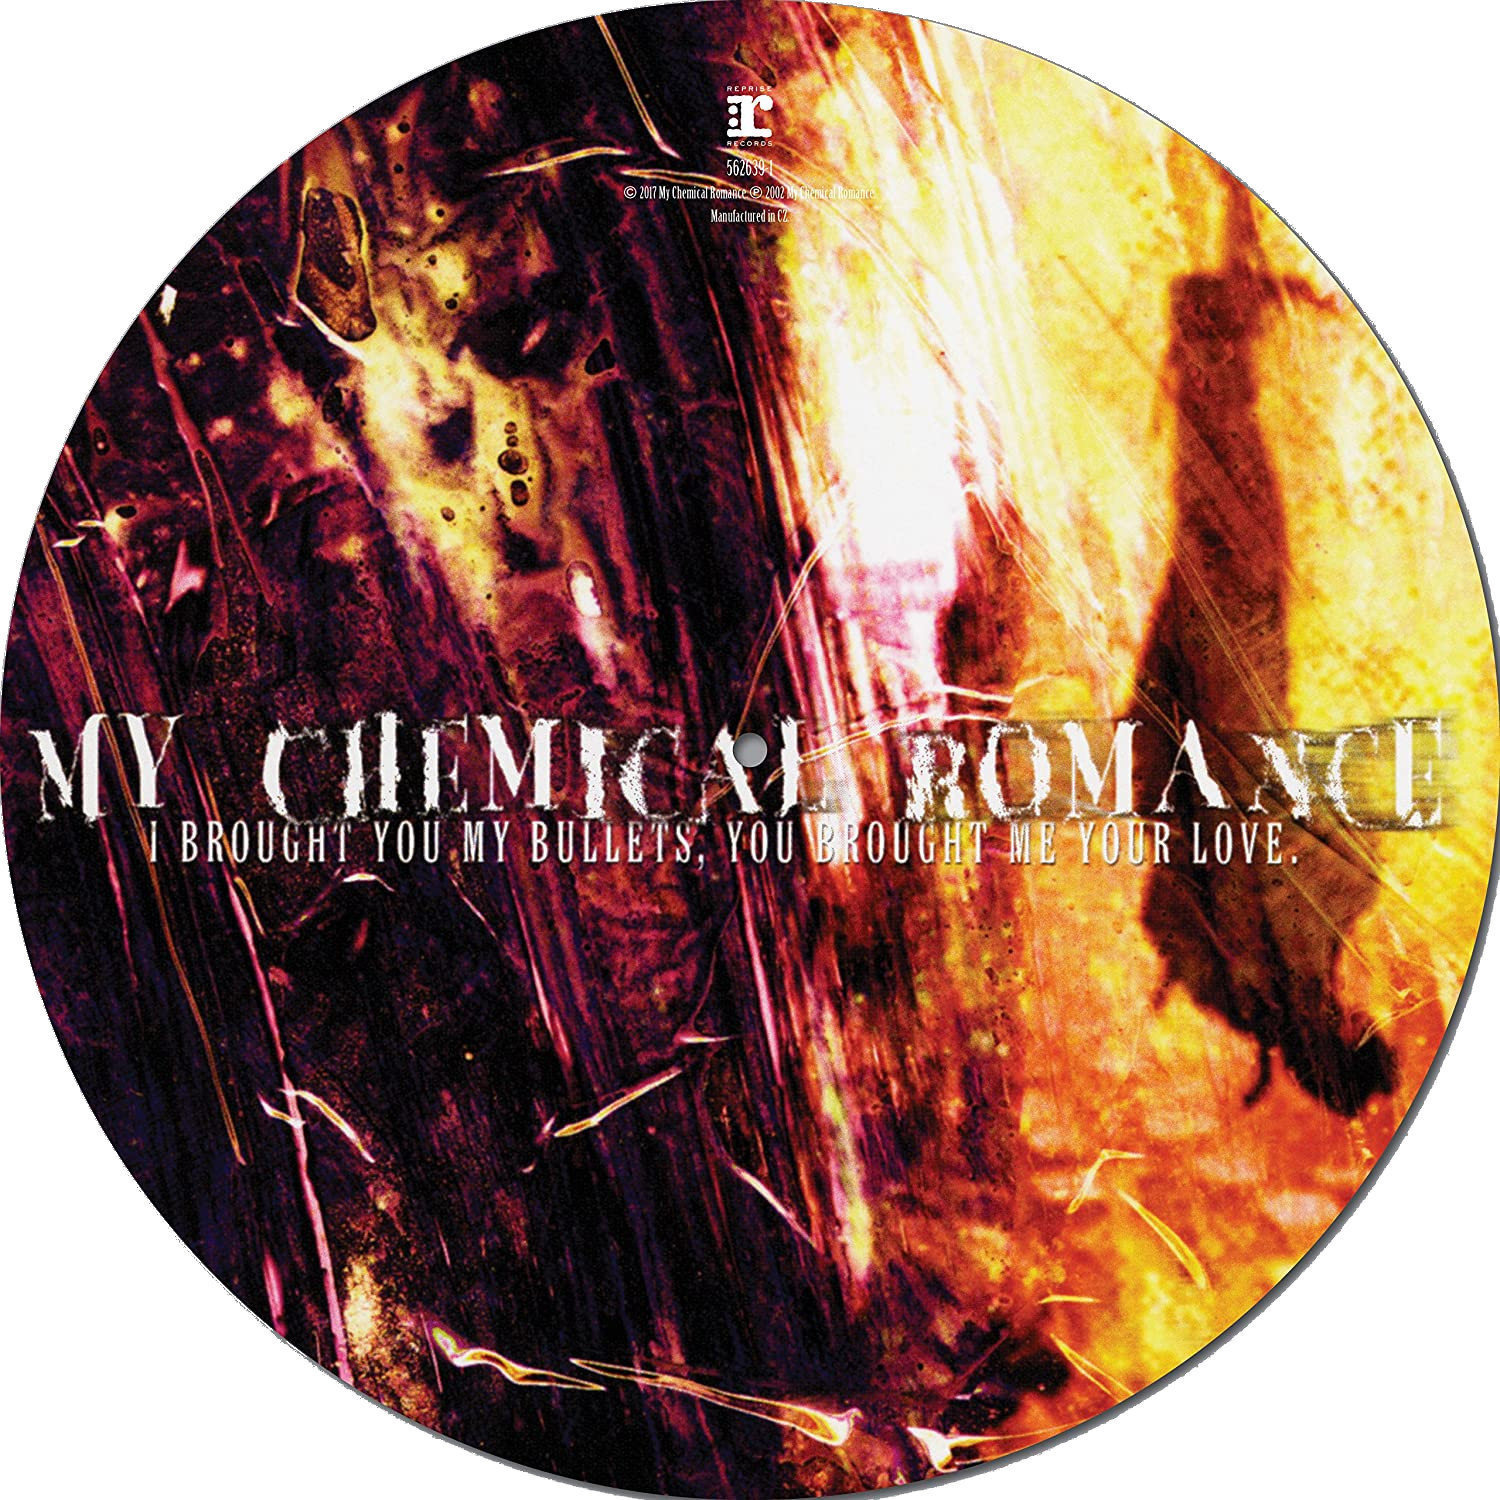 Disco de vinilo My Chemical Romance - I Brought You My Bullets, You Brought Me Your Love (Picture Disc) (LP)